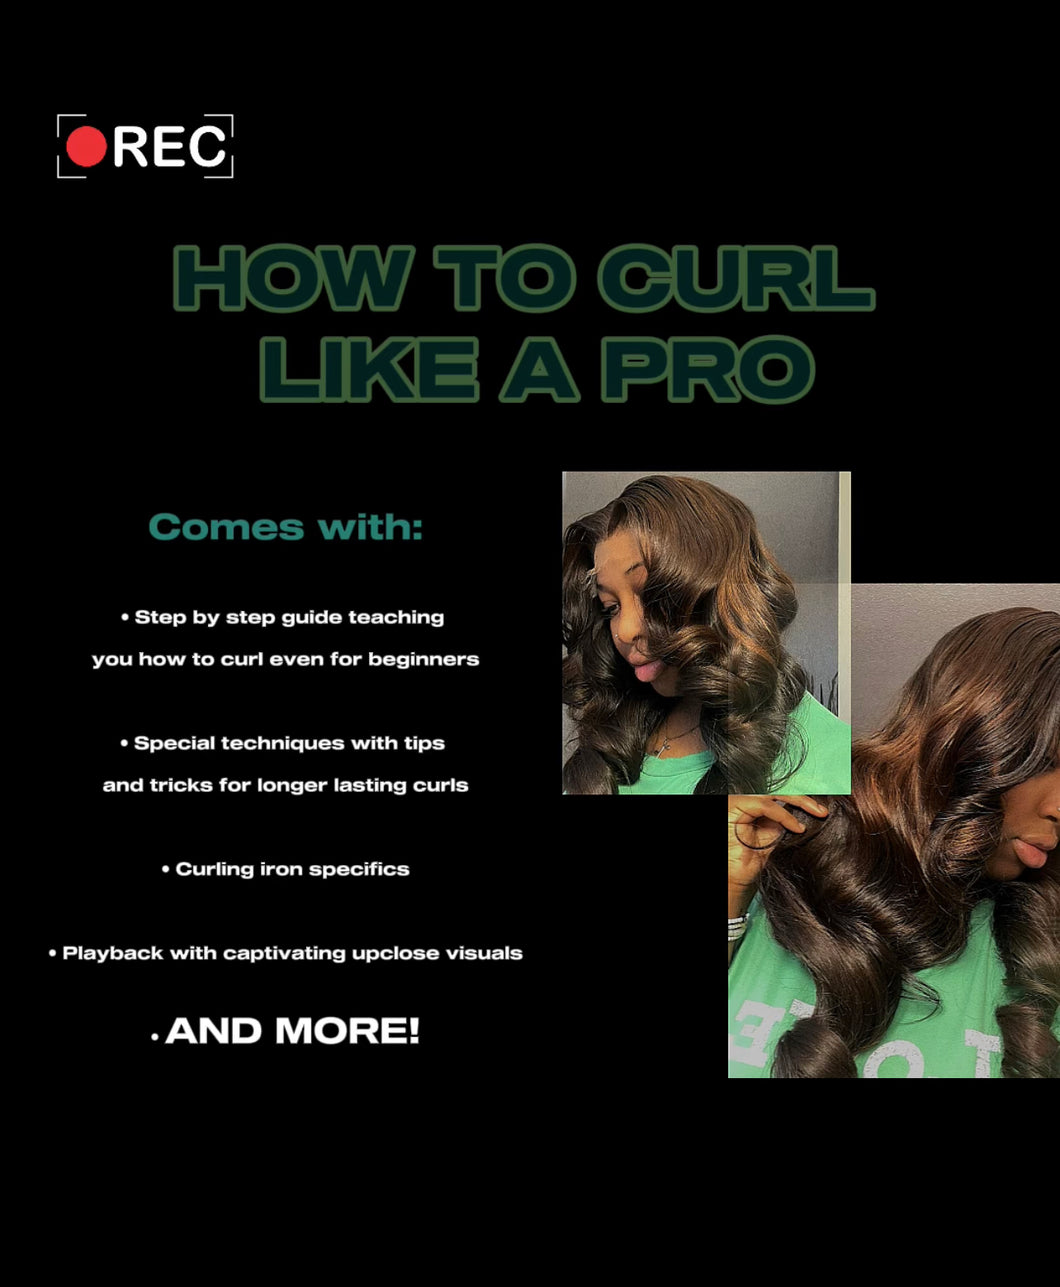 How To Curl Like A Pro